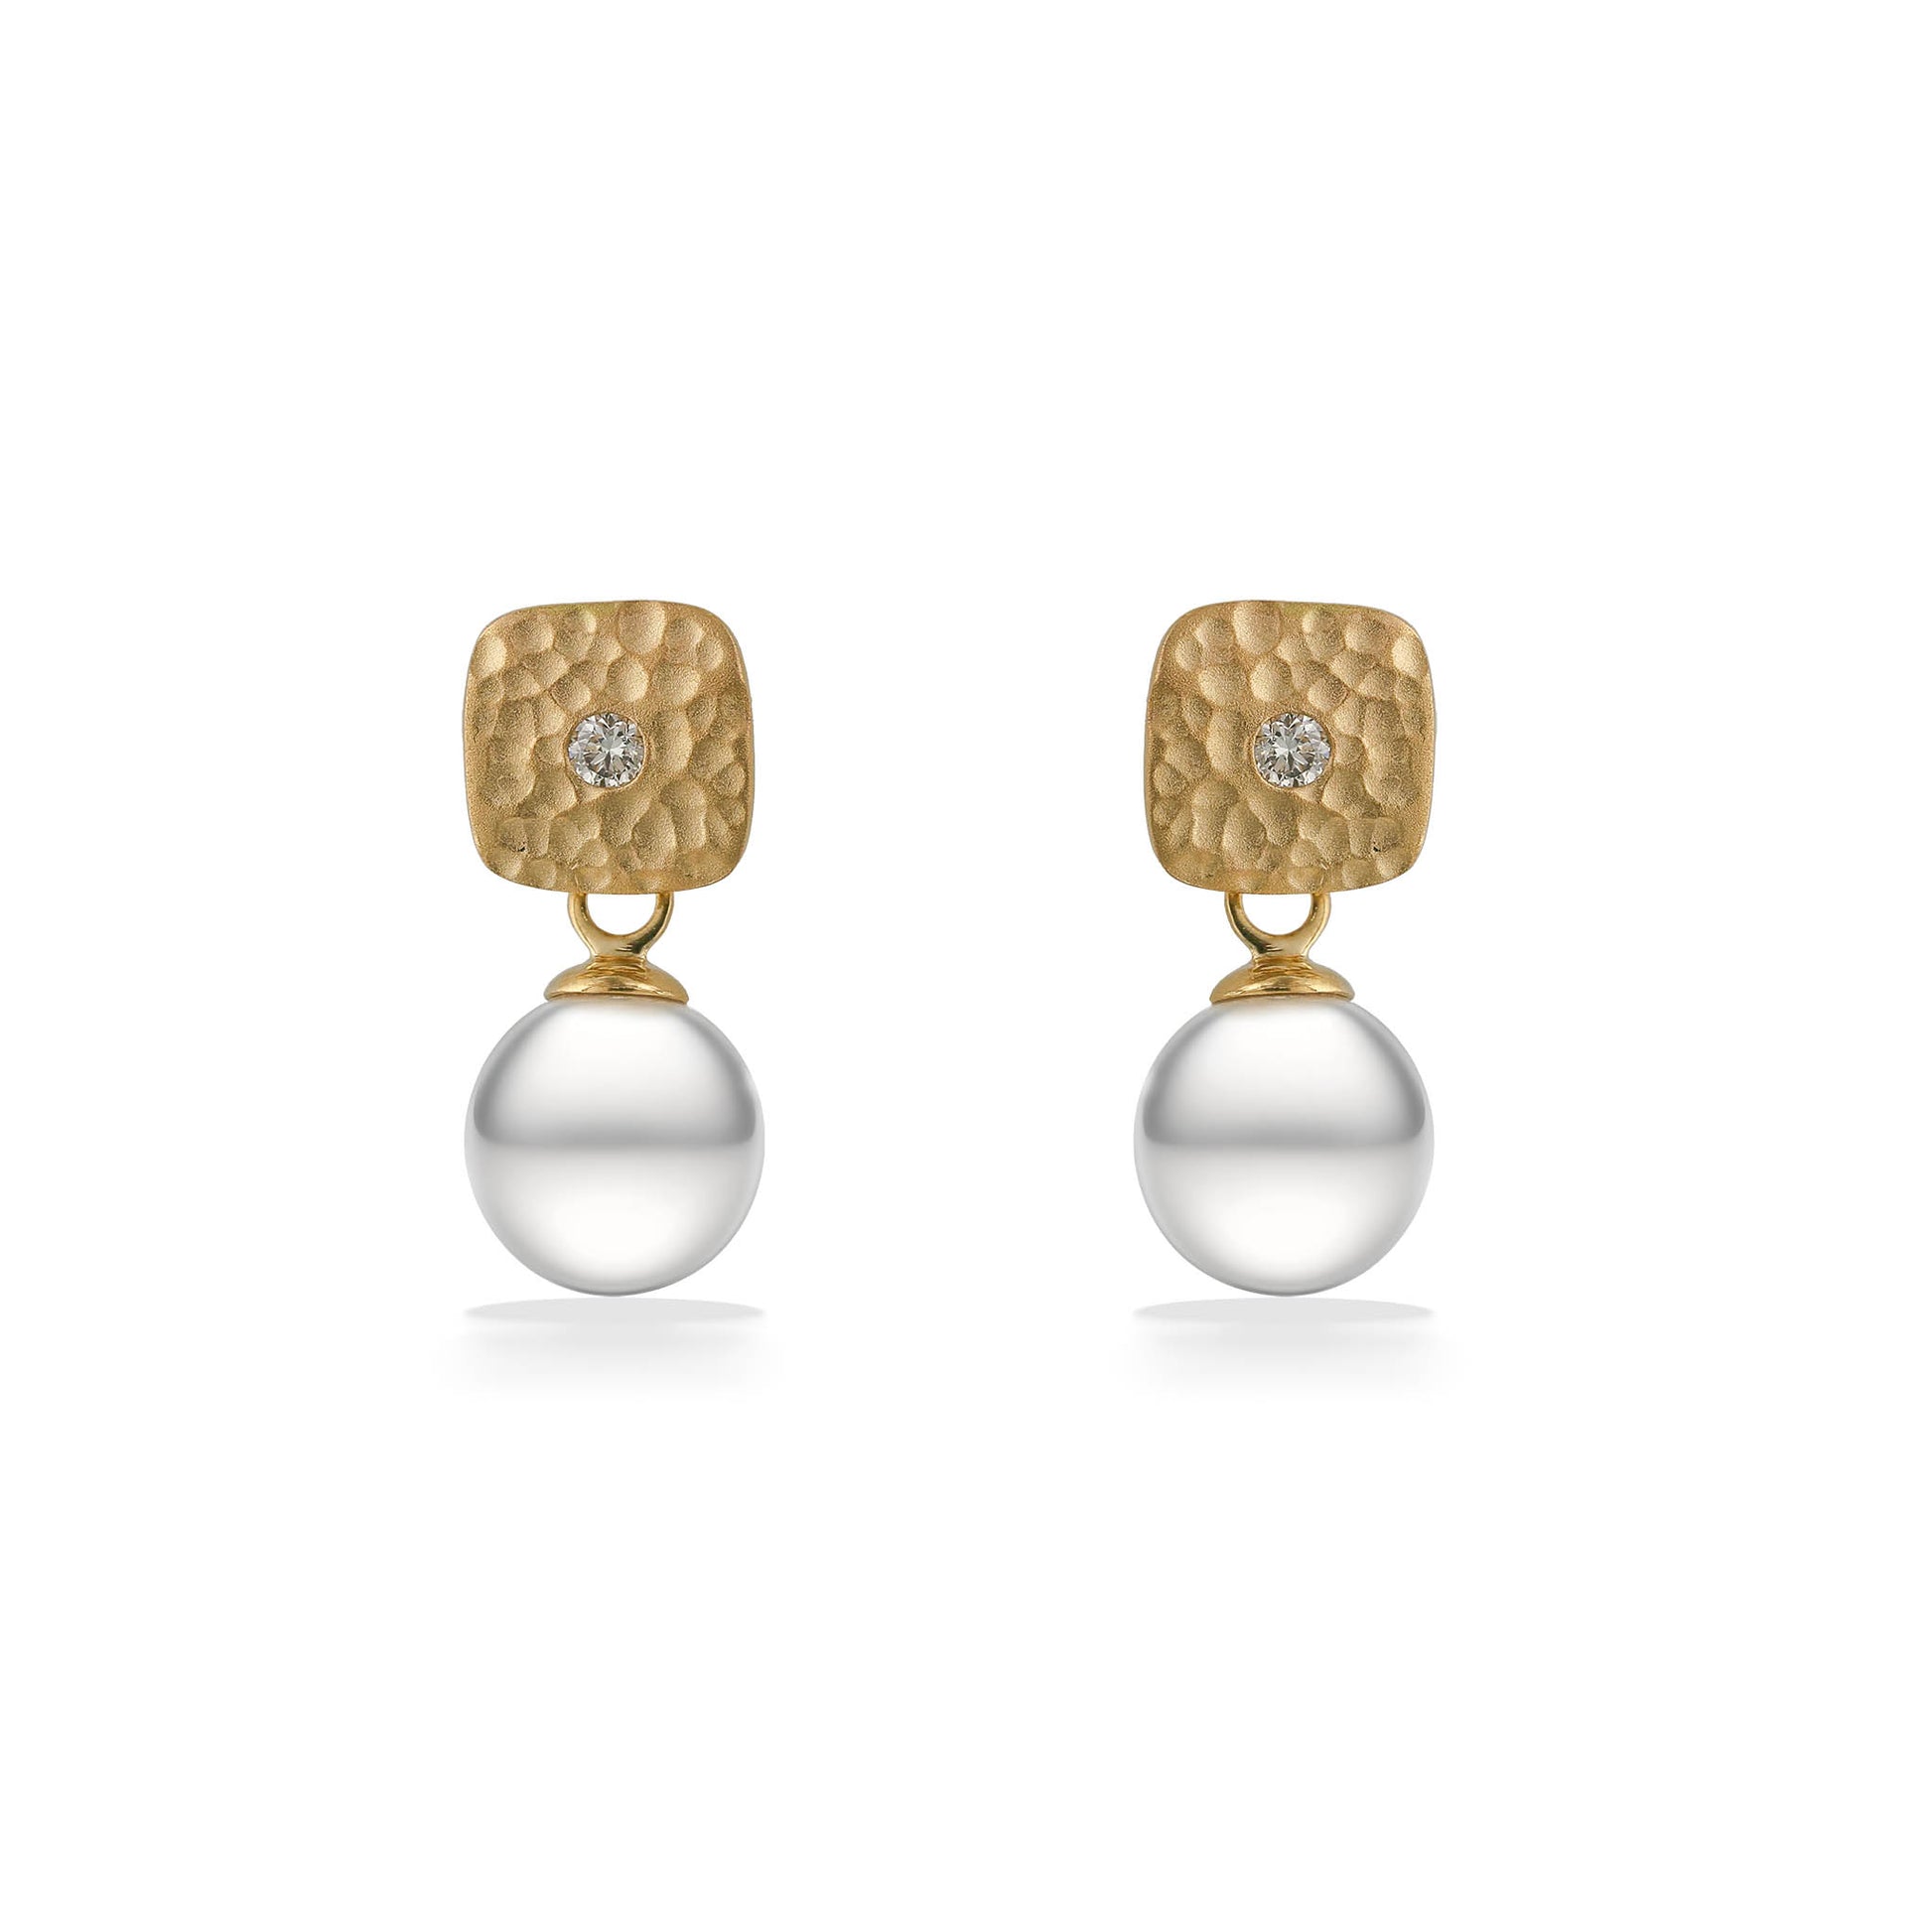 44770 - 14K Yellow Gold - White South Sea Pearl Structured Drop Earrings